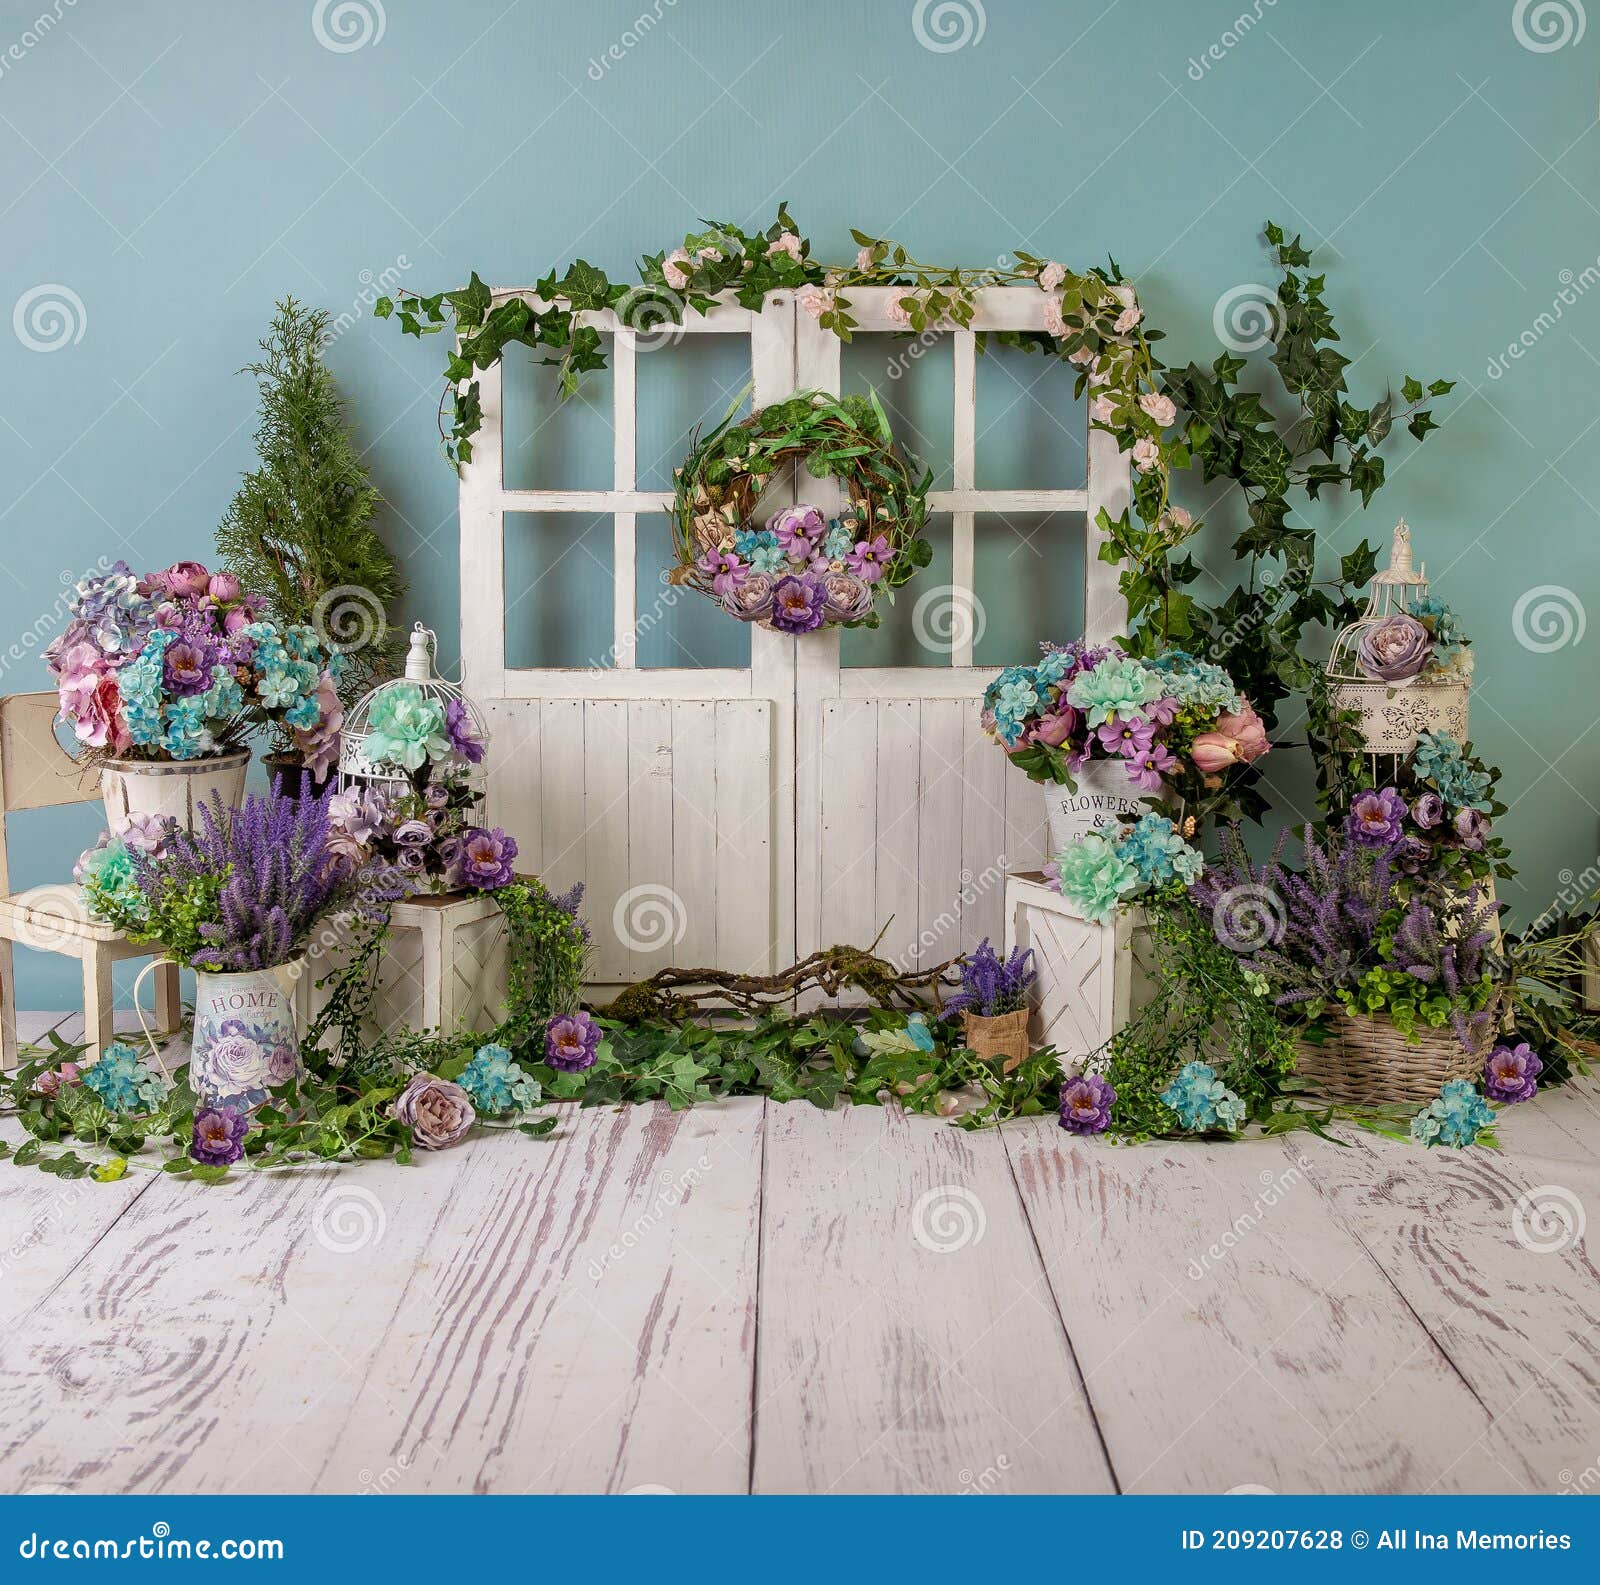 turqoise spring sett up with colourful flowers pink , purple, bleu, and turqoise  flowers, vintage wood parquet